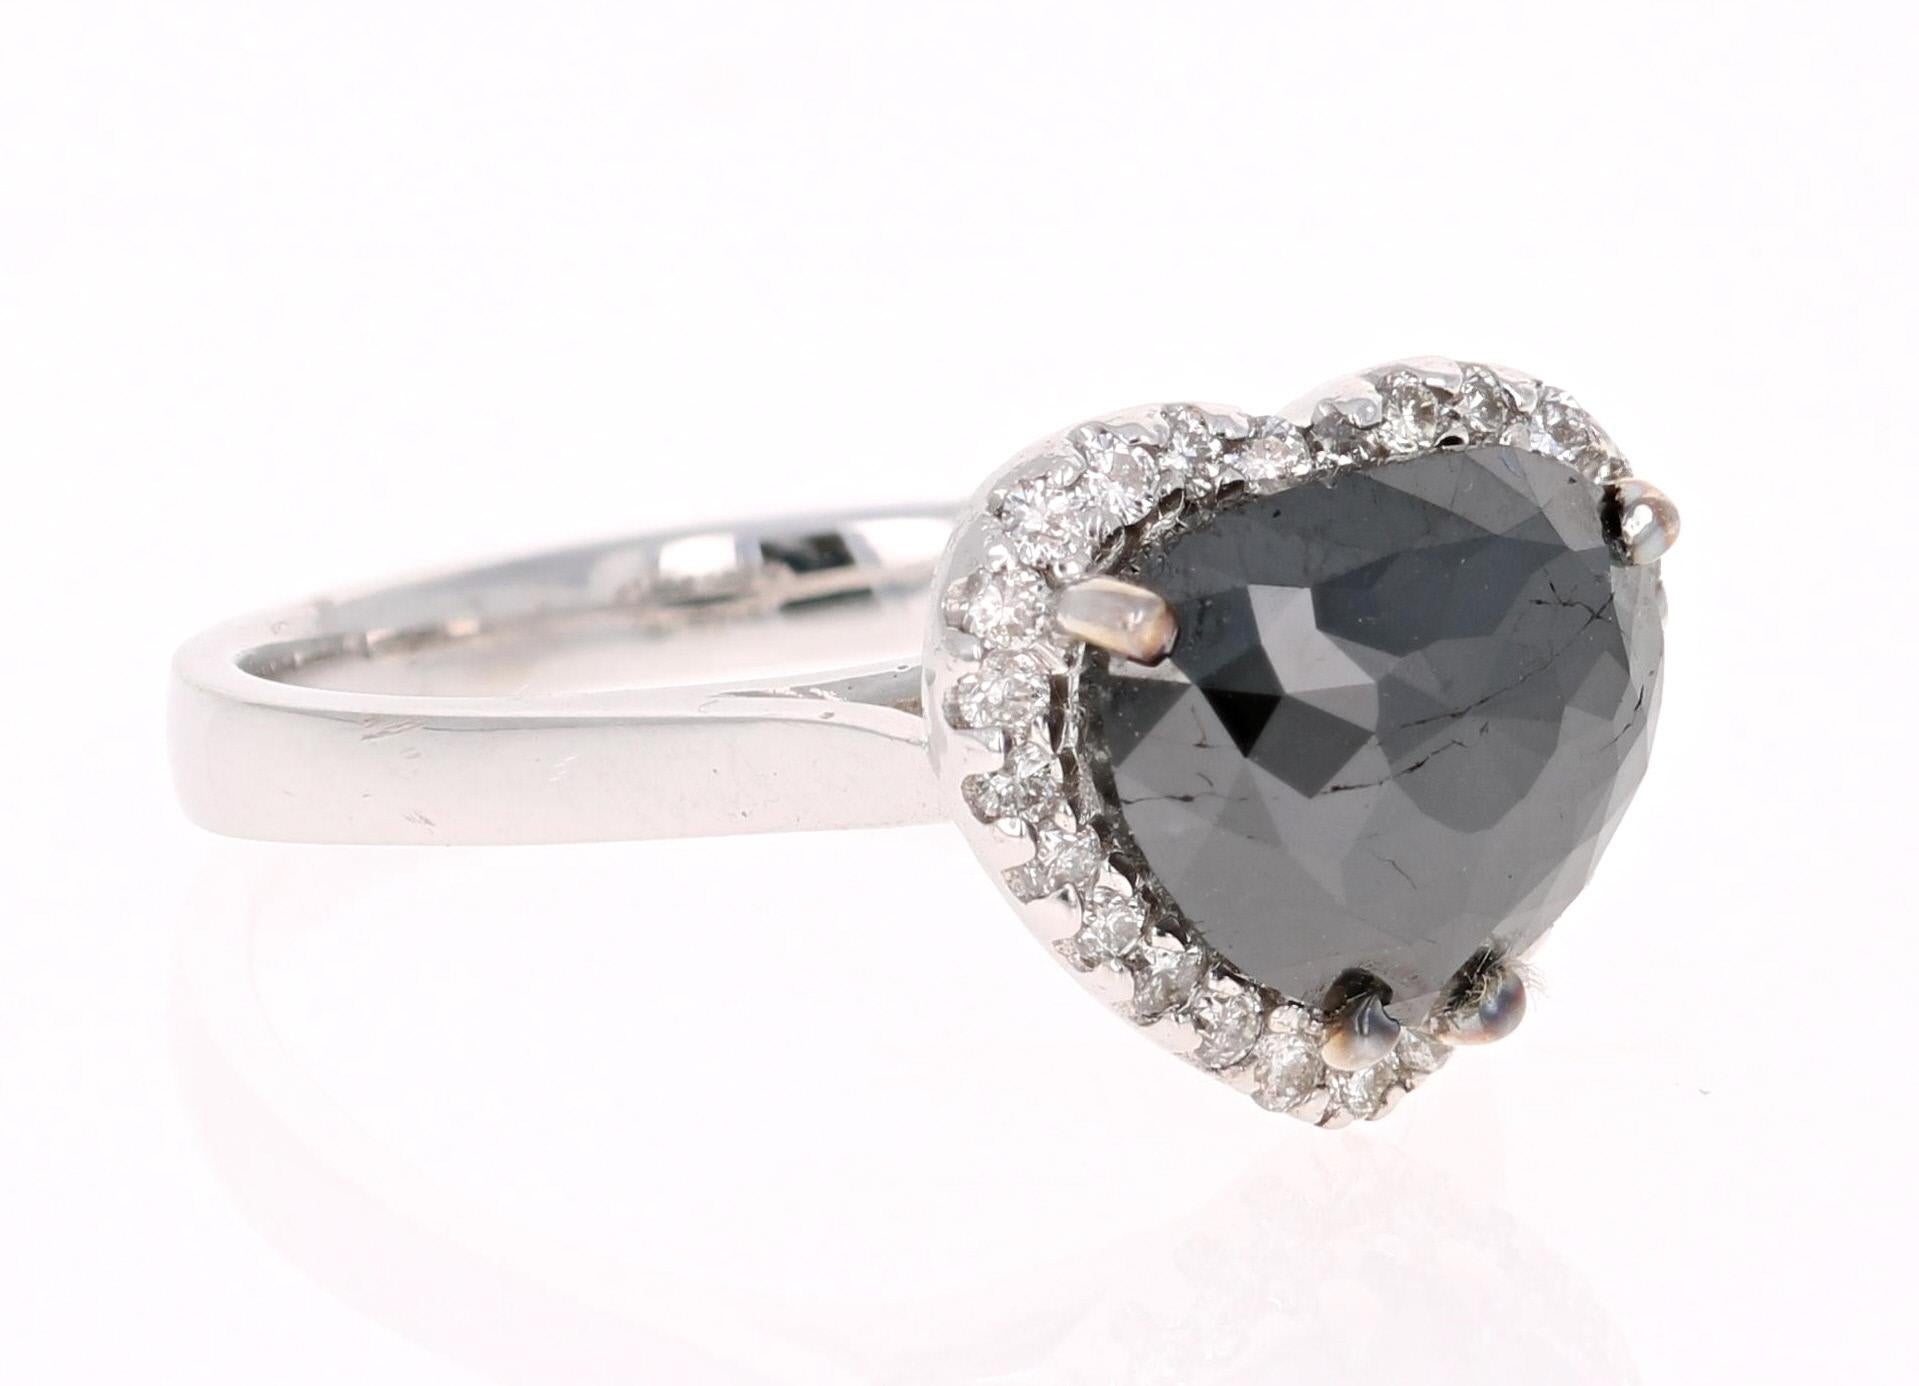 BOLD, ELEGANT and BEAUTIFULLY UNIQUE!

A 2.34 Carat Black Diamond White Gold Cocktail or Fashion Ring! Can also be used as a very unique and rare Engagement or Bridal Ring!  

A 2.07 Carat Rounded Heart Cut Black Diamond sits in the center and is